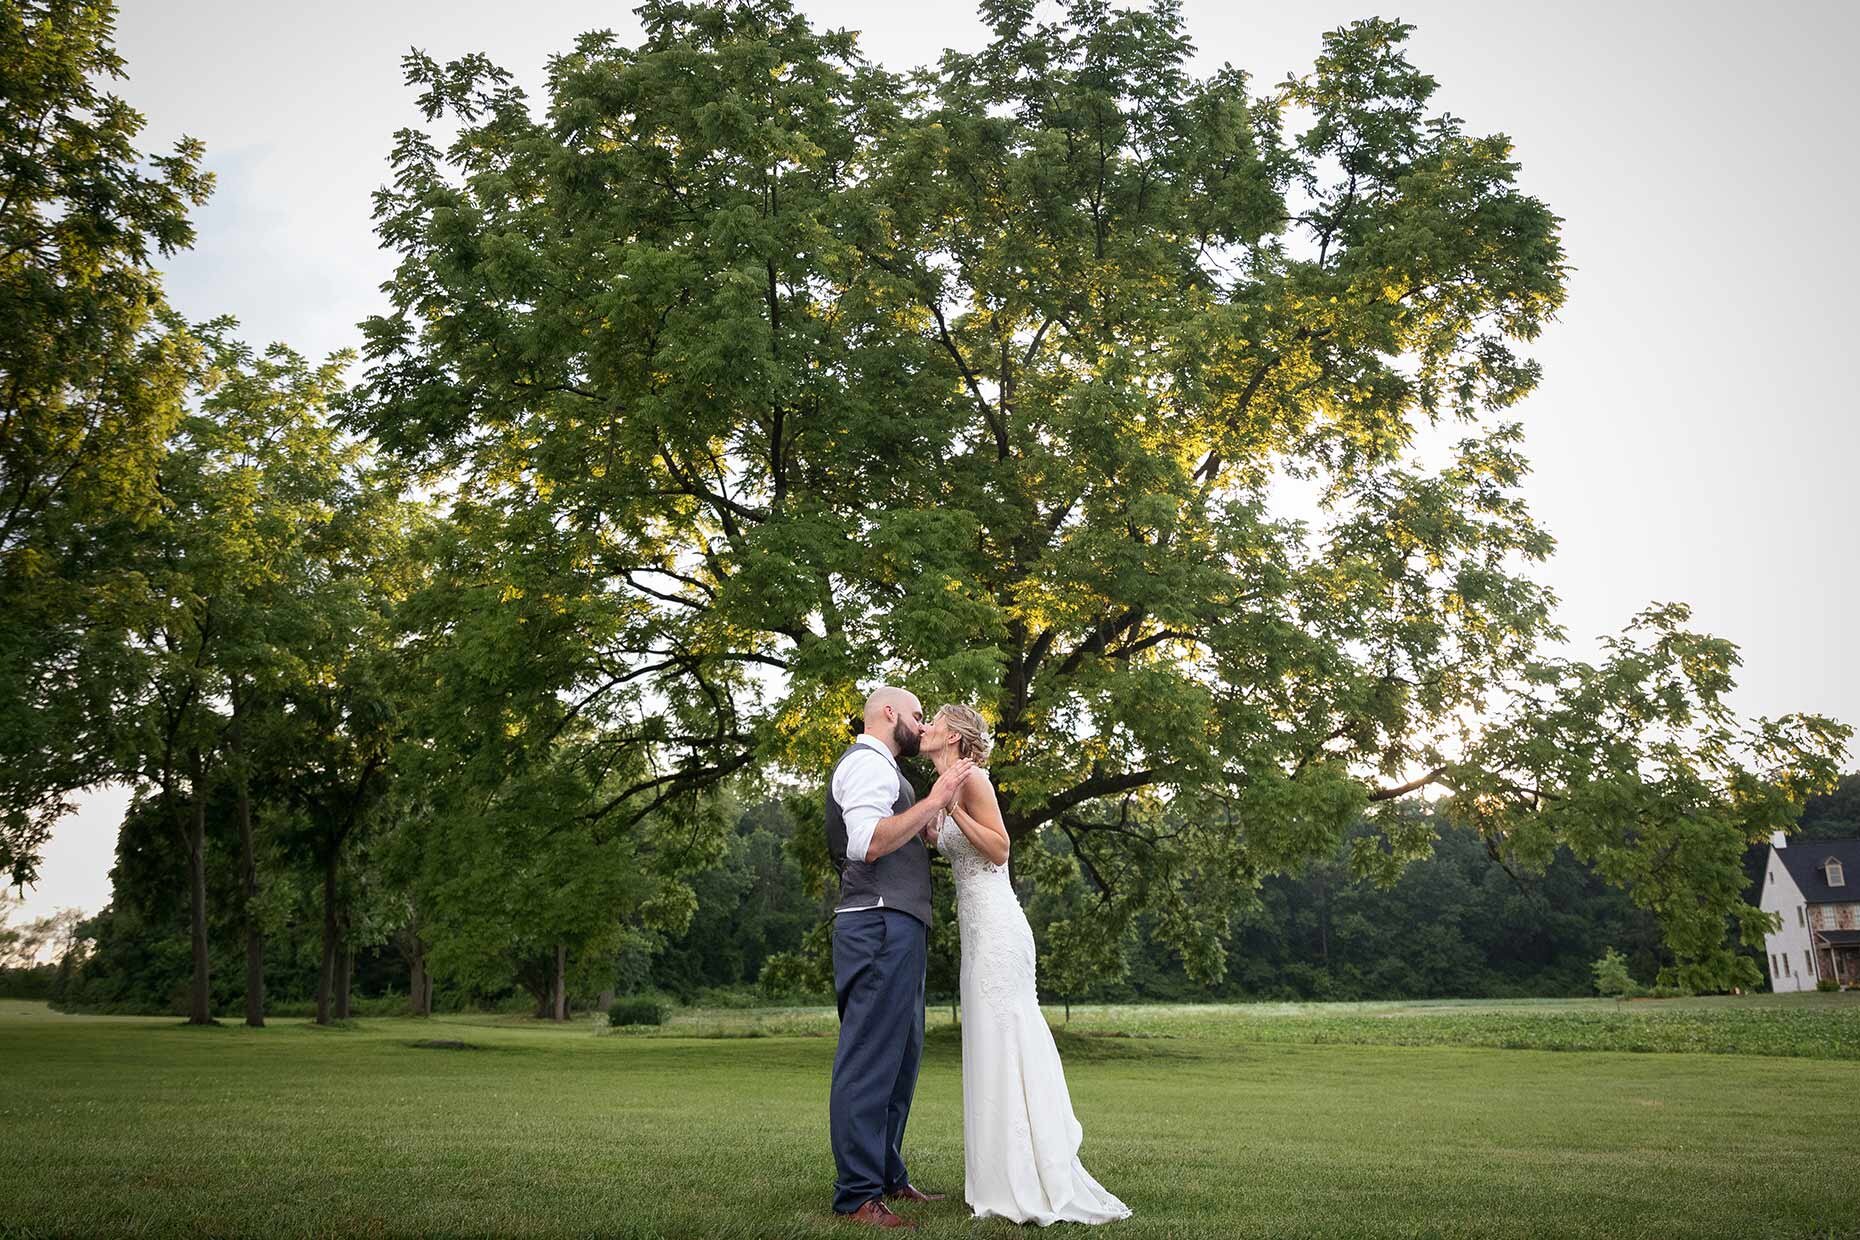 Bride &amp; Groom kissing in front of tree at sunset